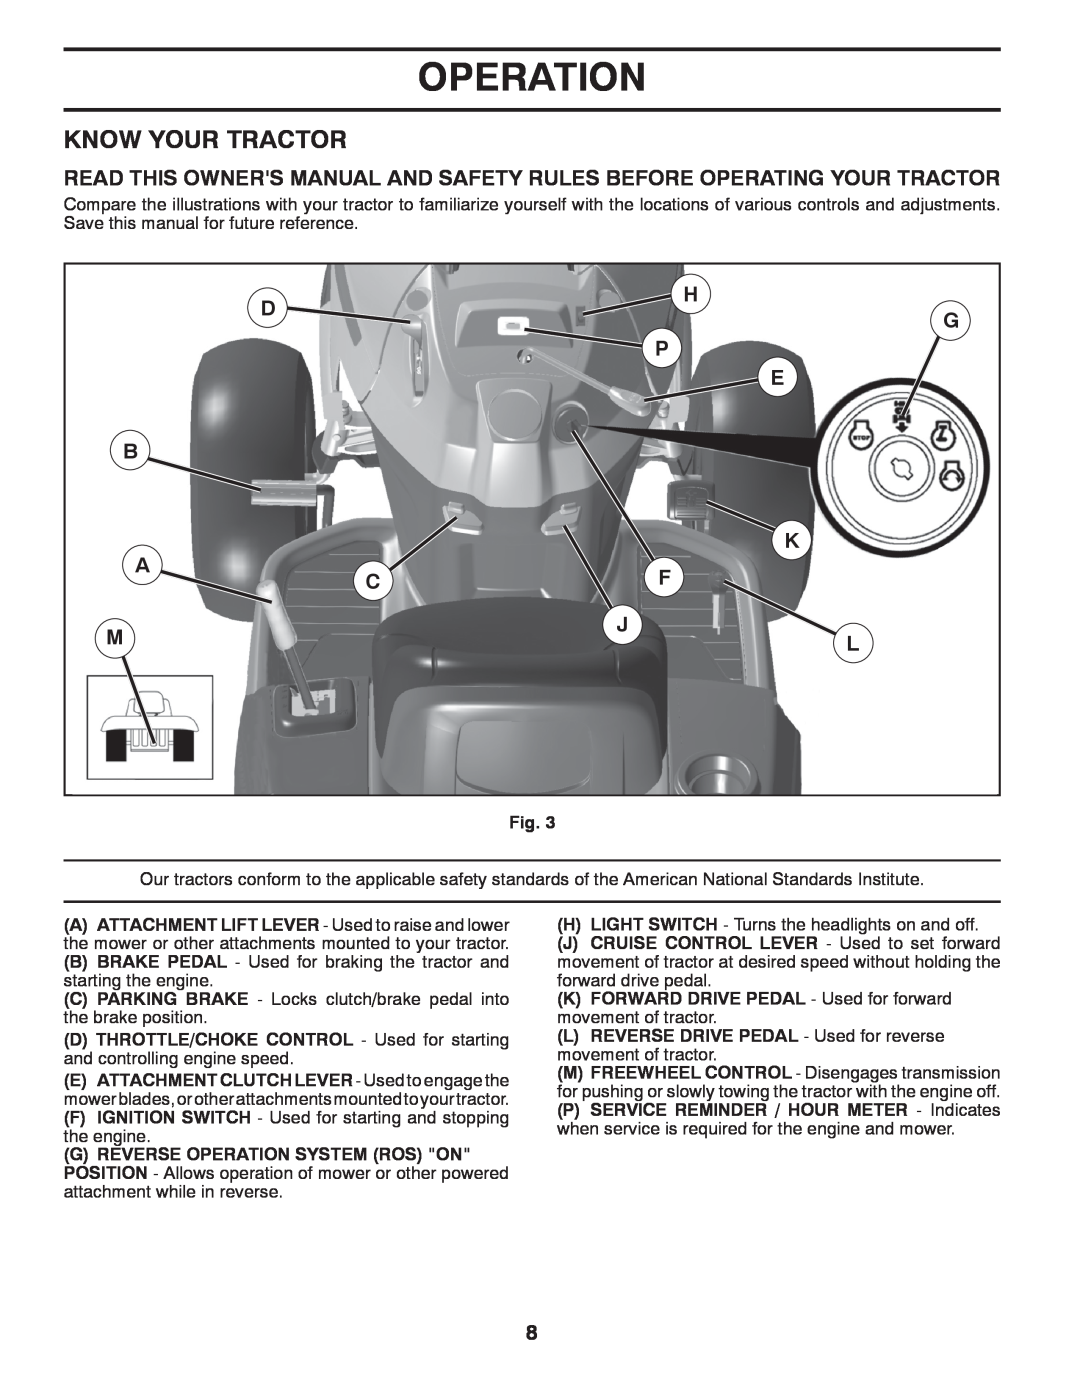 Husqvarna 917.289541 owner manual Know Your Tractor, B K Acf Mjl, Operation 